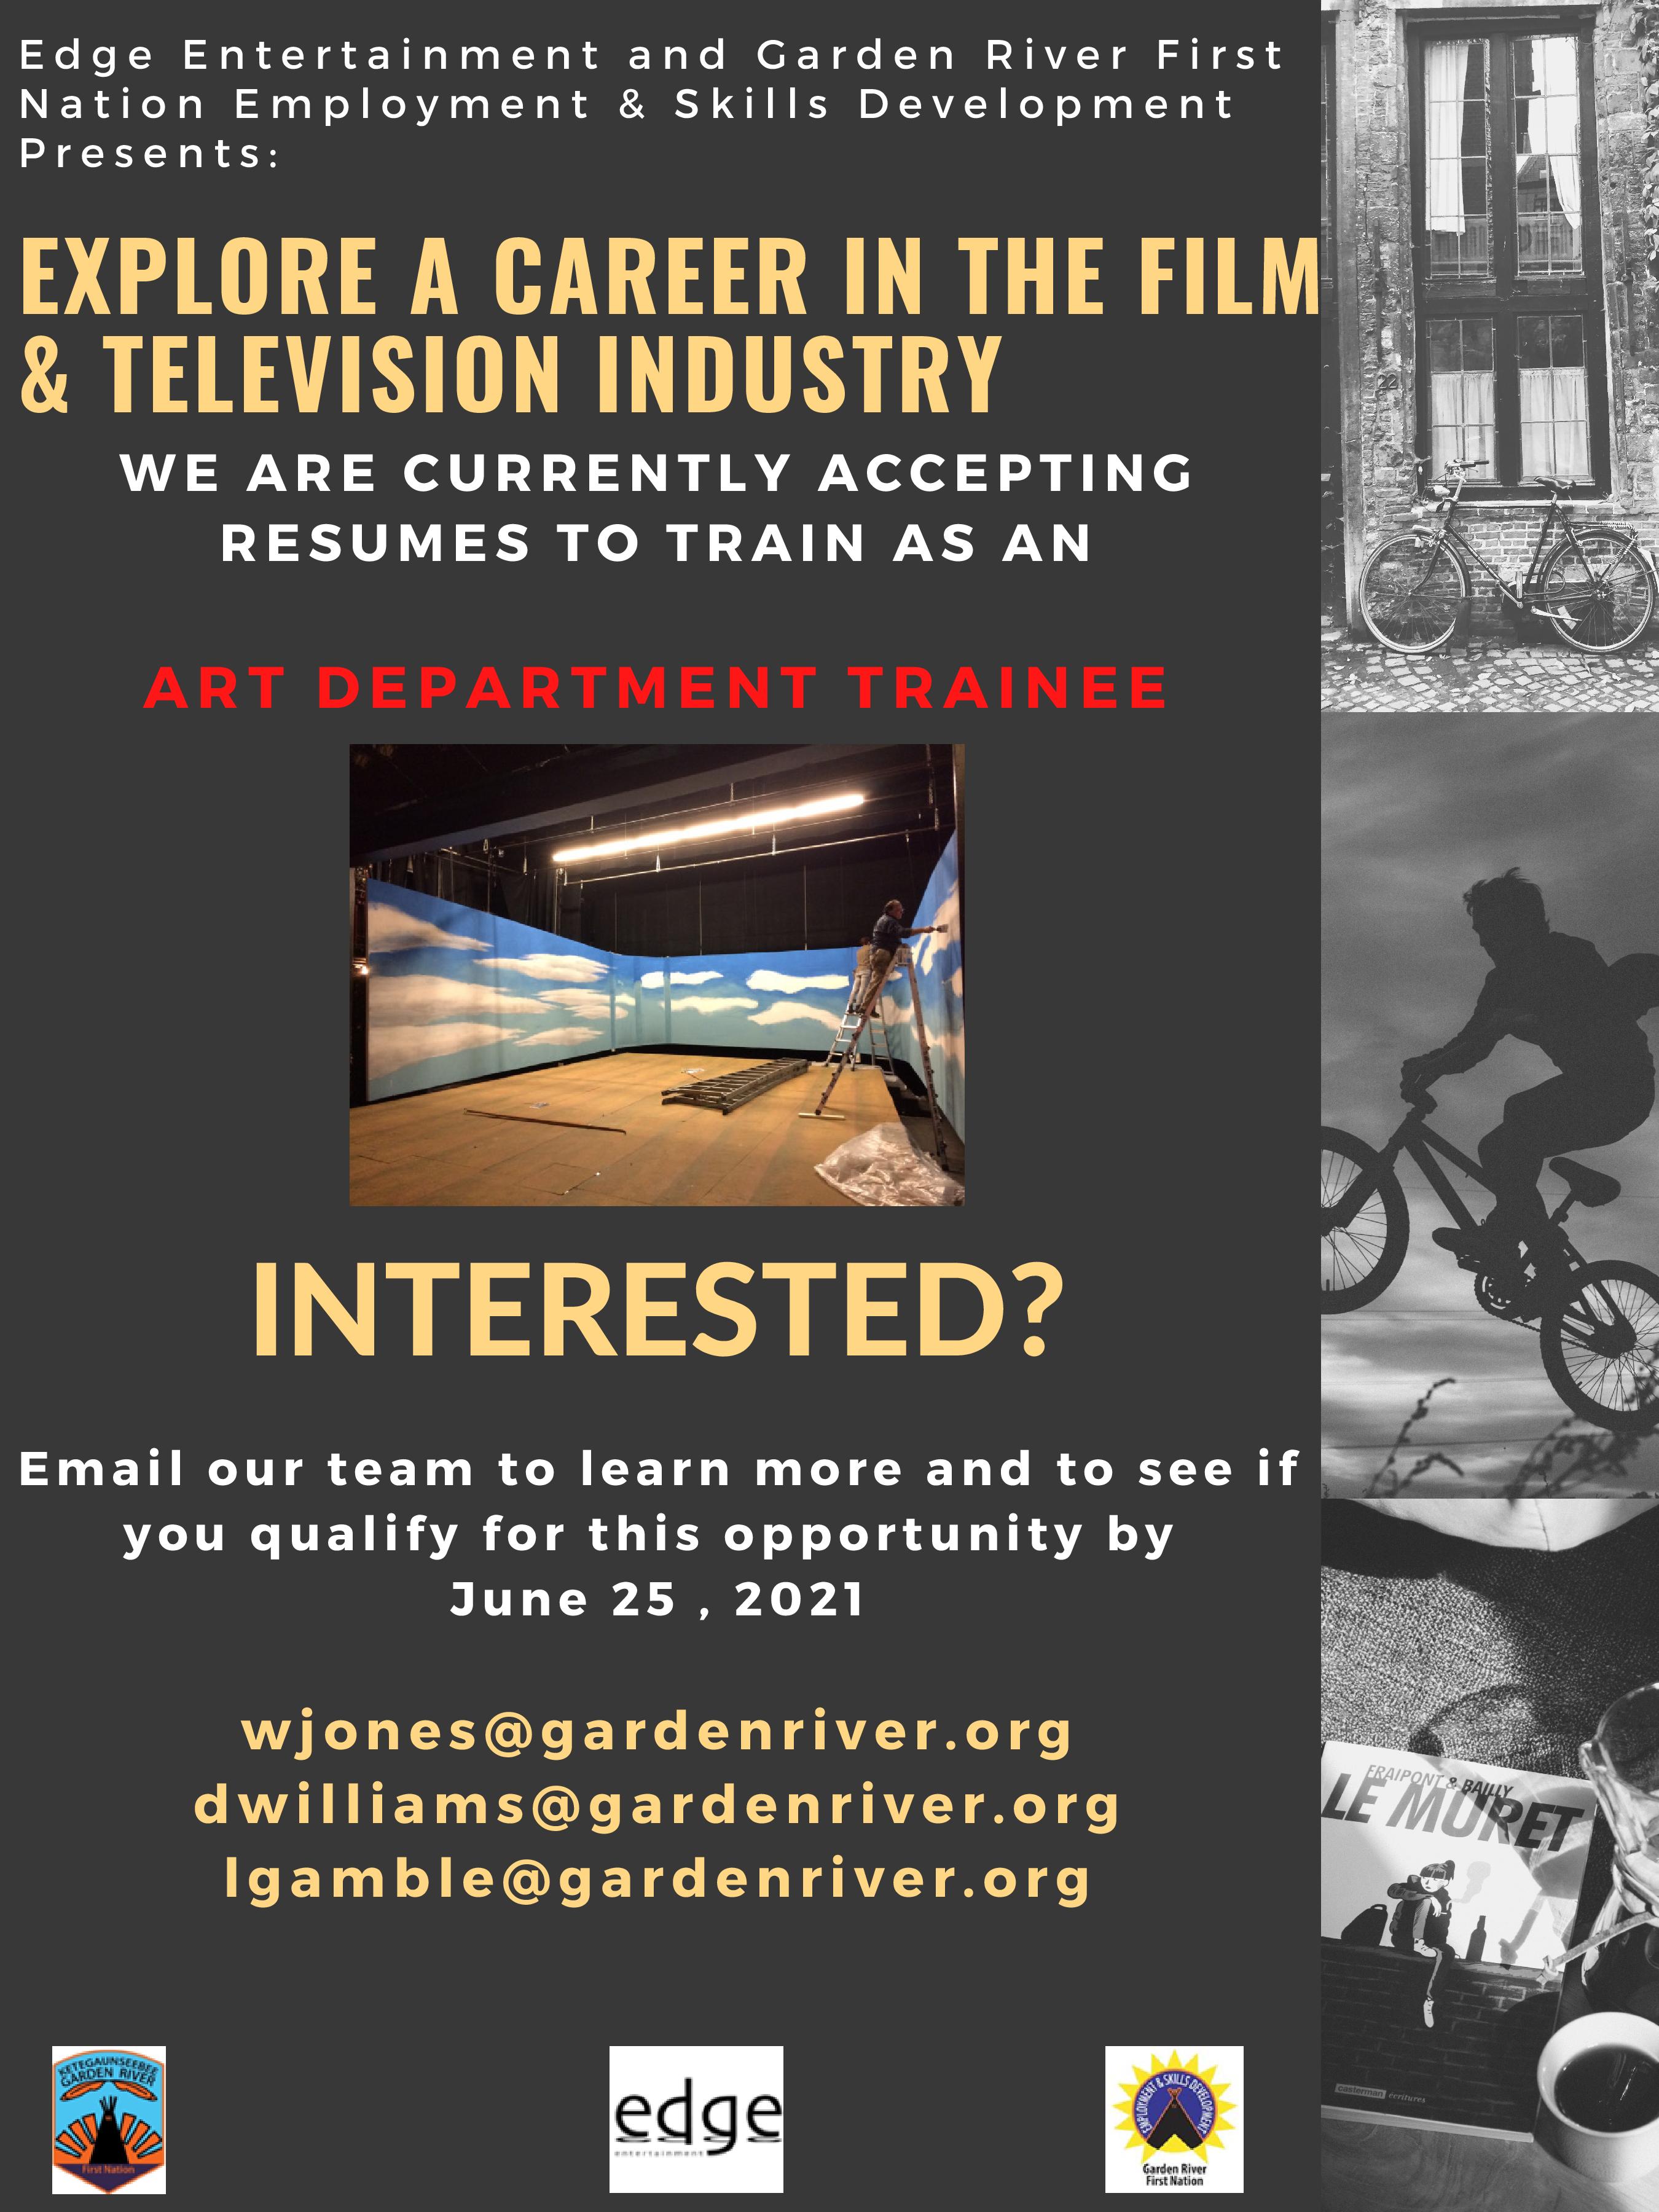 GRFN Employment Skills & Development – Explore a Career in the Film & Television Industry